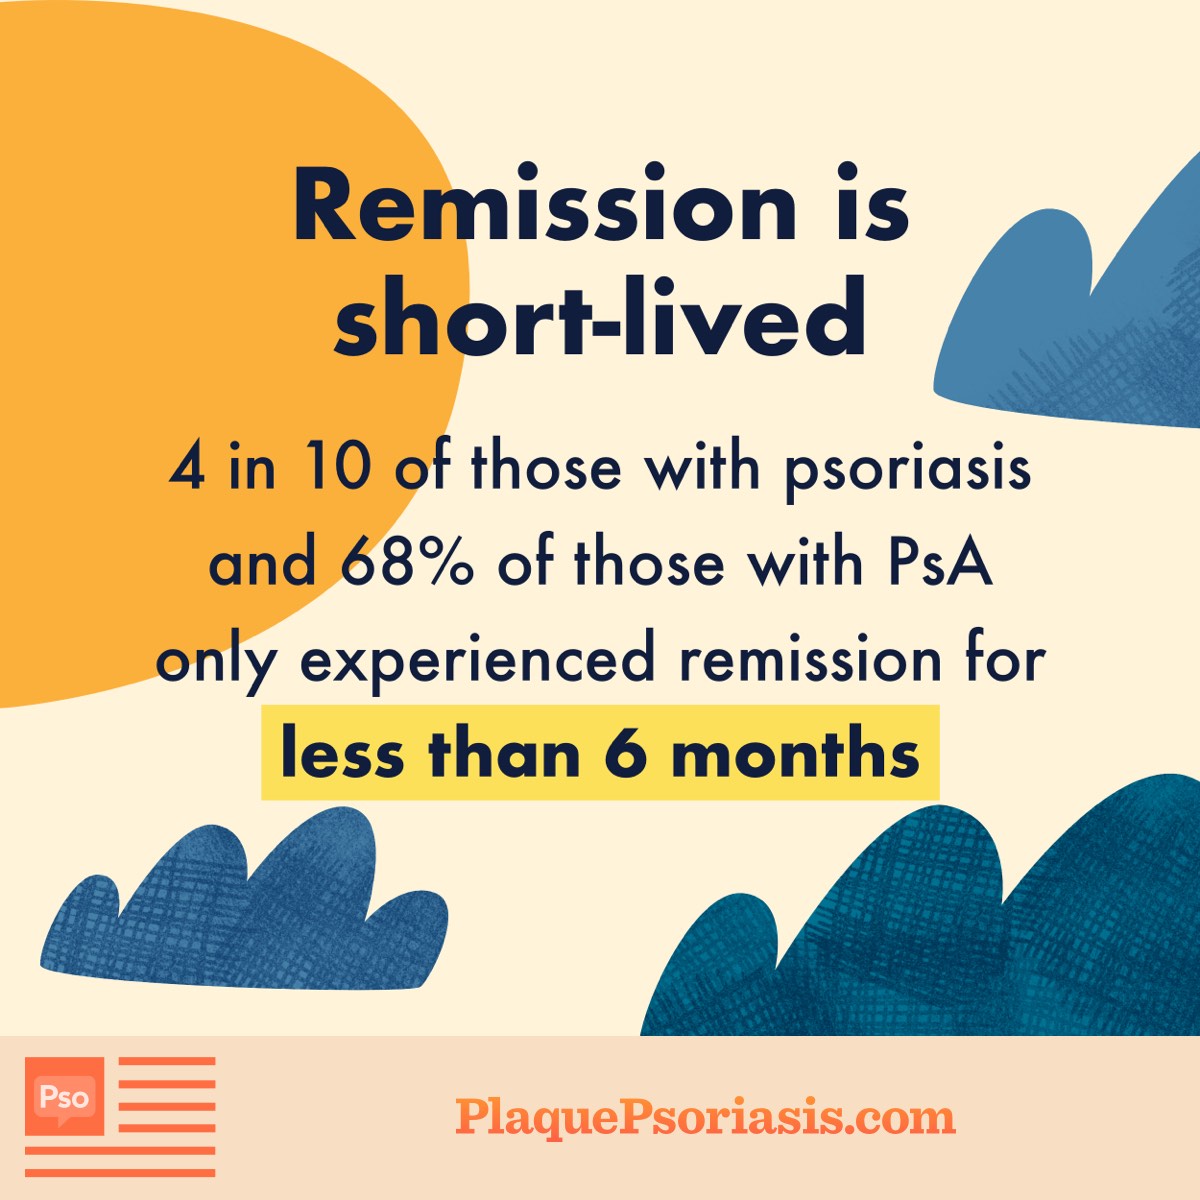 Infographic reading Remission is short-lived. 4 in 10 of those with psoriasis and 68% of those with PsA only experienced remission for less than 6 months.